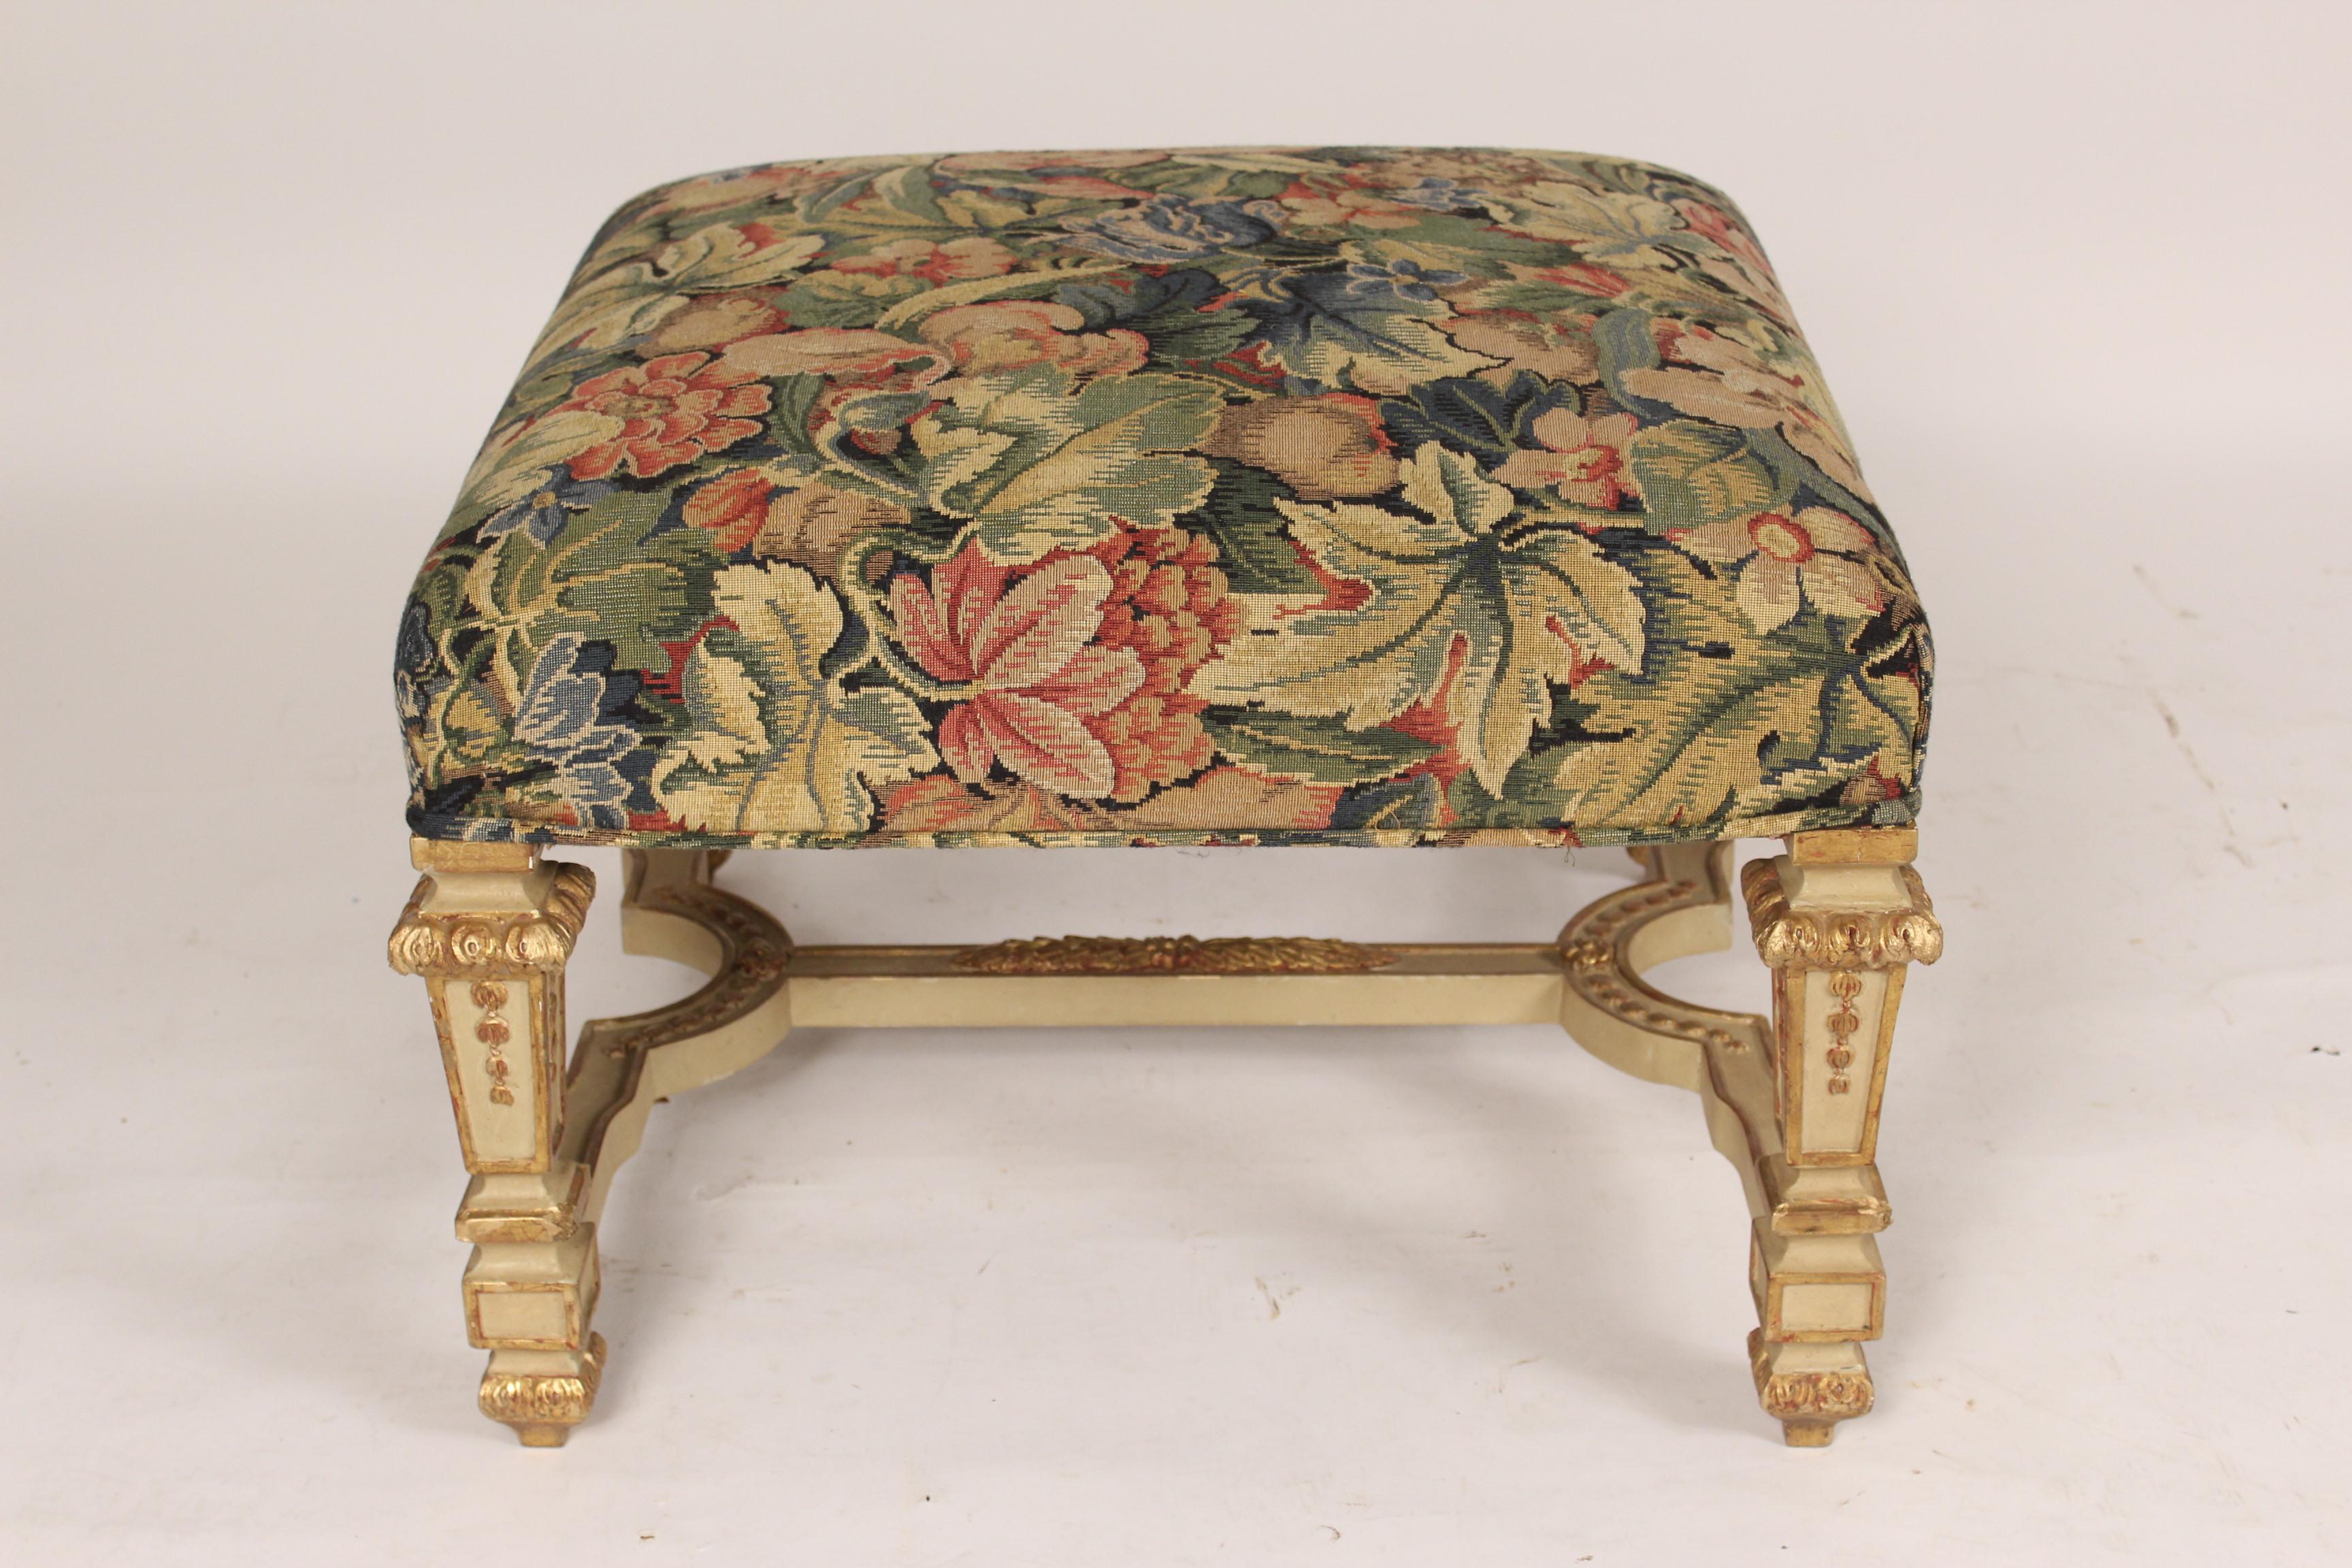 Louis XIV style painted and partial gilt (gold leaf) bench with floral tapestry style upholstered seat, late 20th century.